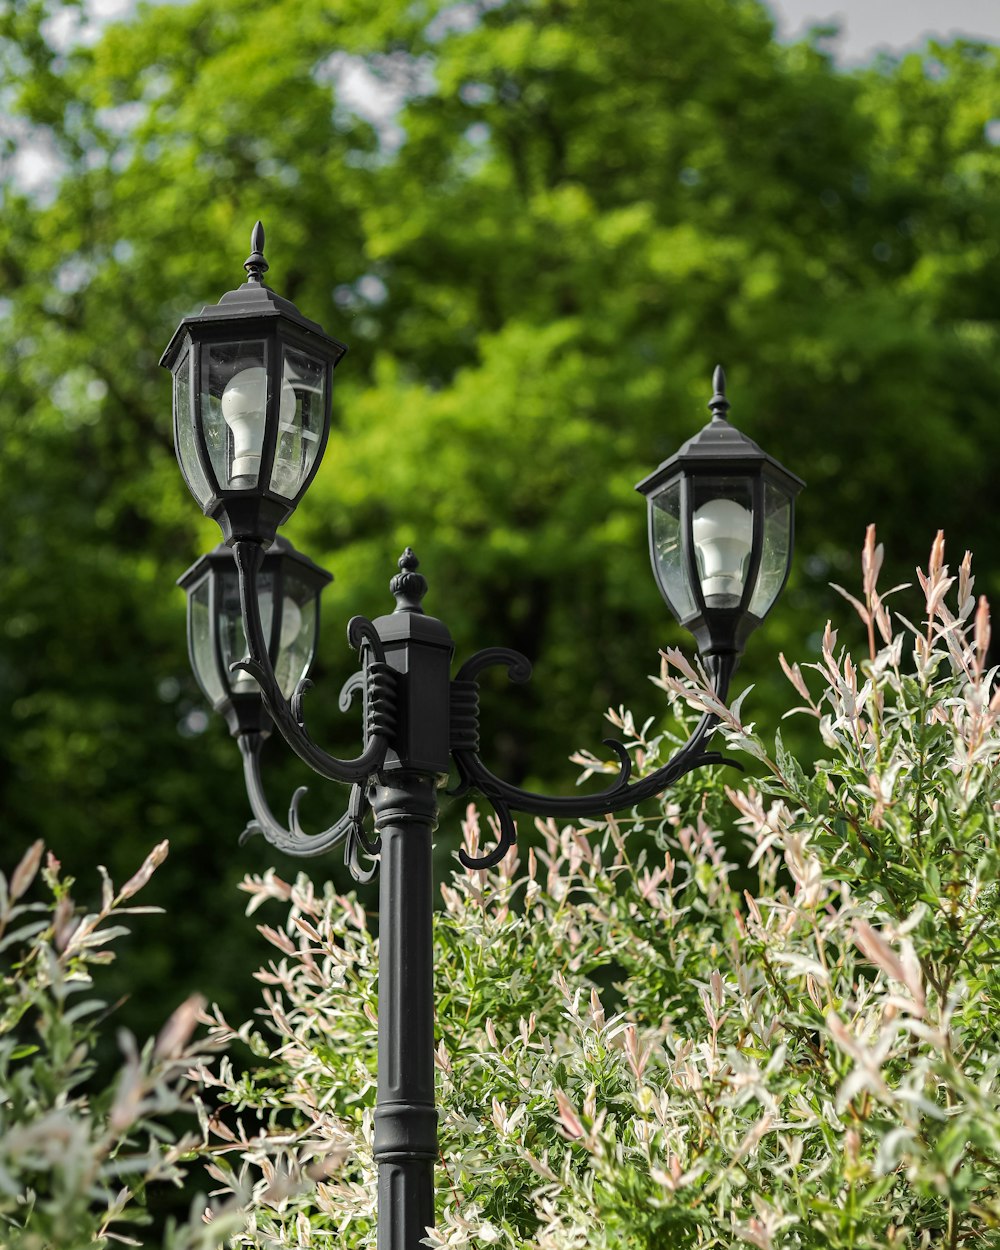 a couple of street lamps